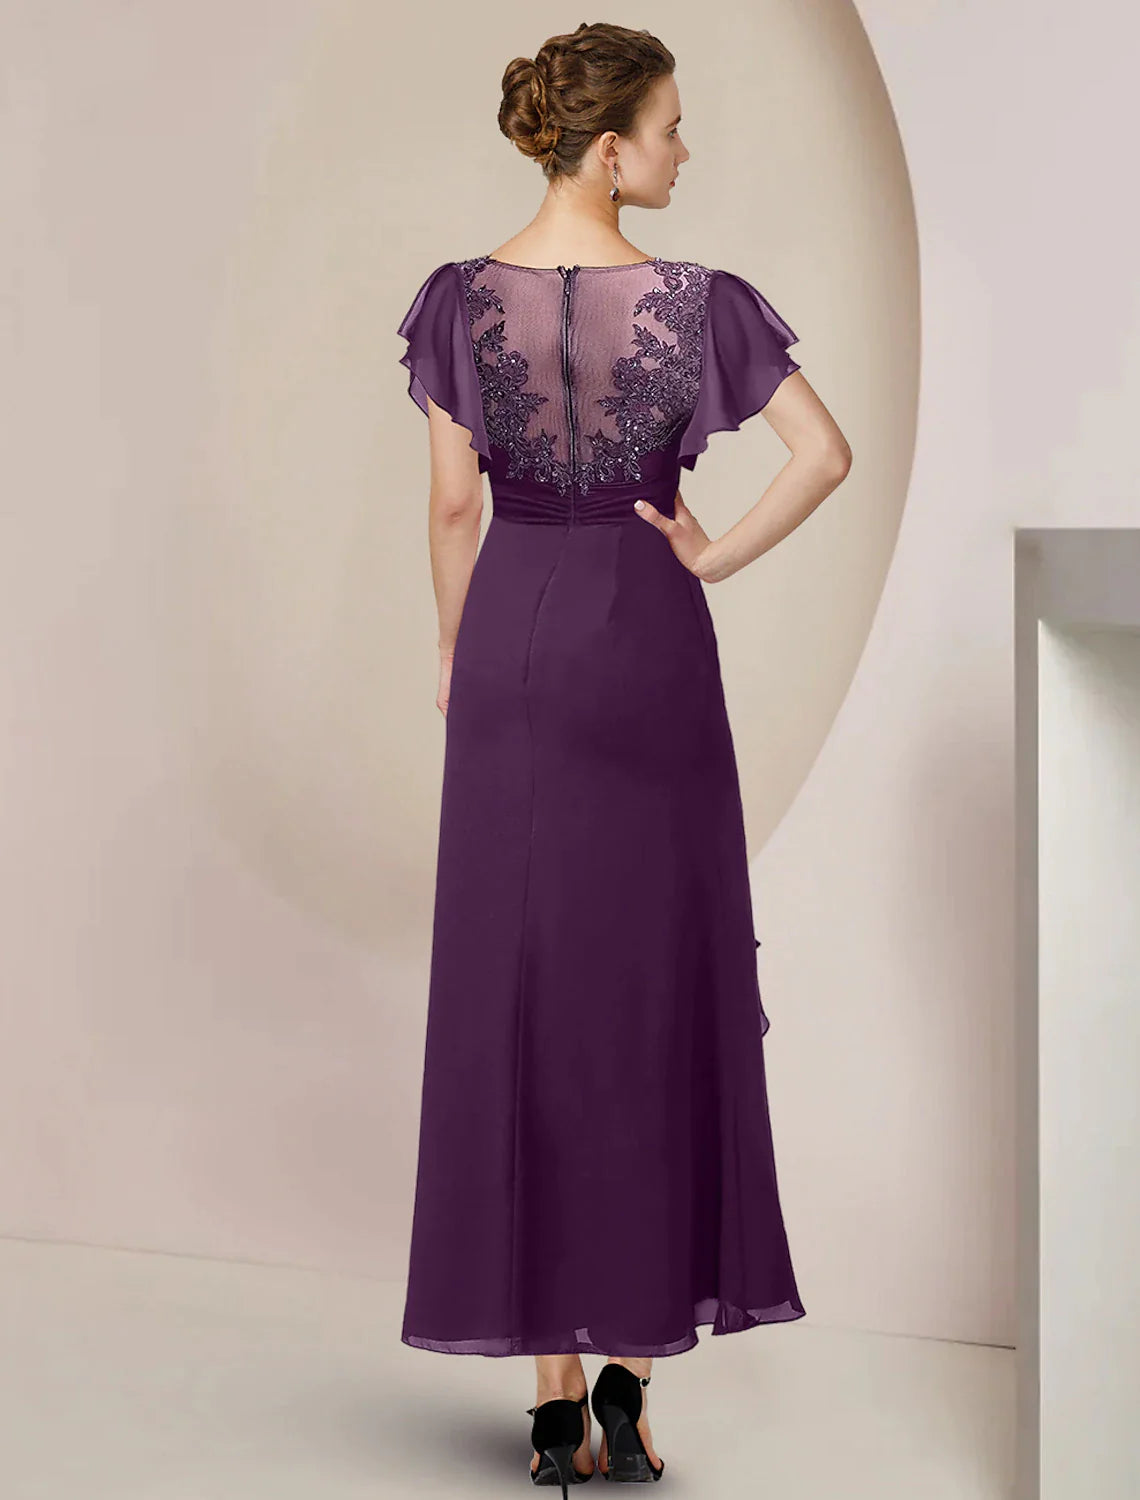 A-Line Mother of the Bride Dress Formal Wedding Guest Elegant Scoop Neck Tea Length Chiffon Lace 3/4 Length Sleeve with Beading Sequin Appliques